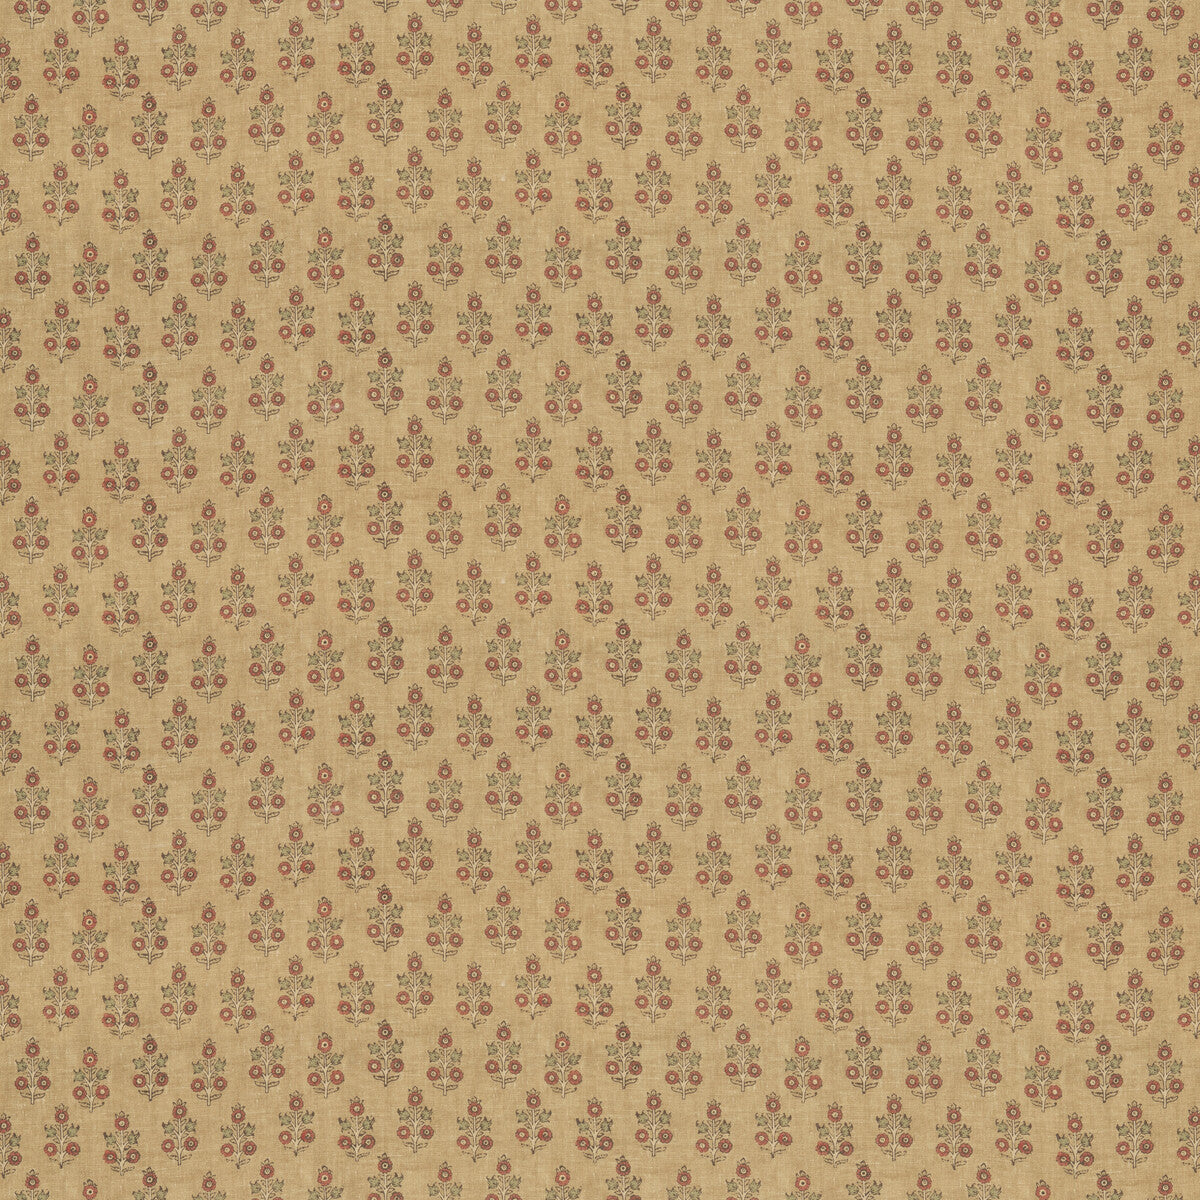 Poppy Sprig fabric in ochre color - pattern BP11003.3.0 - by G P &amp; J Baker in the House Small Prints collection